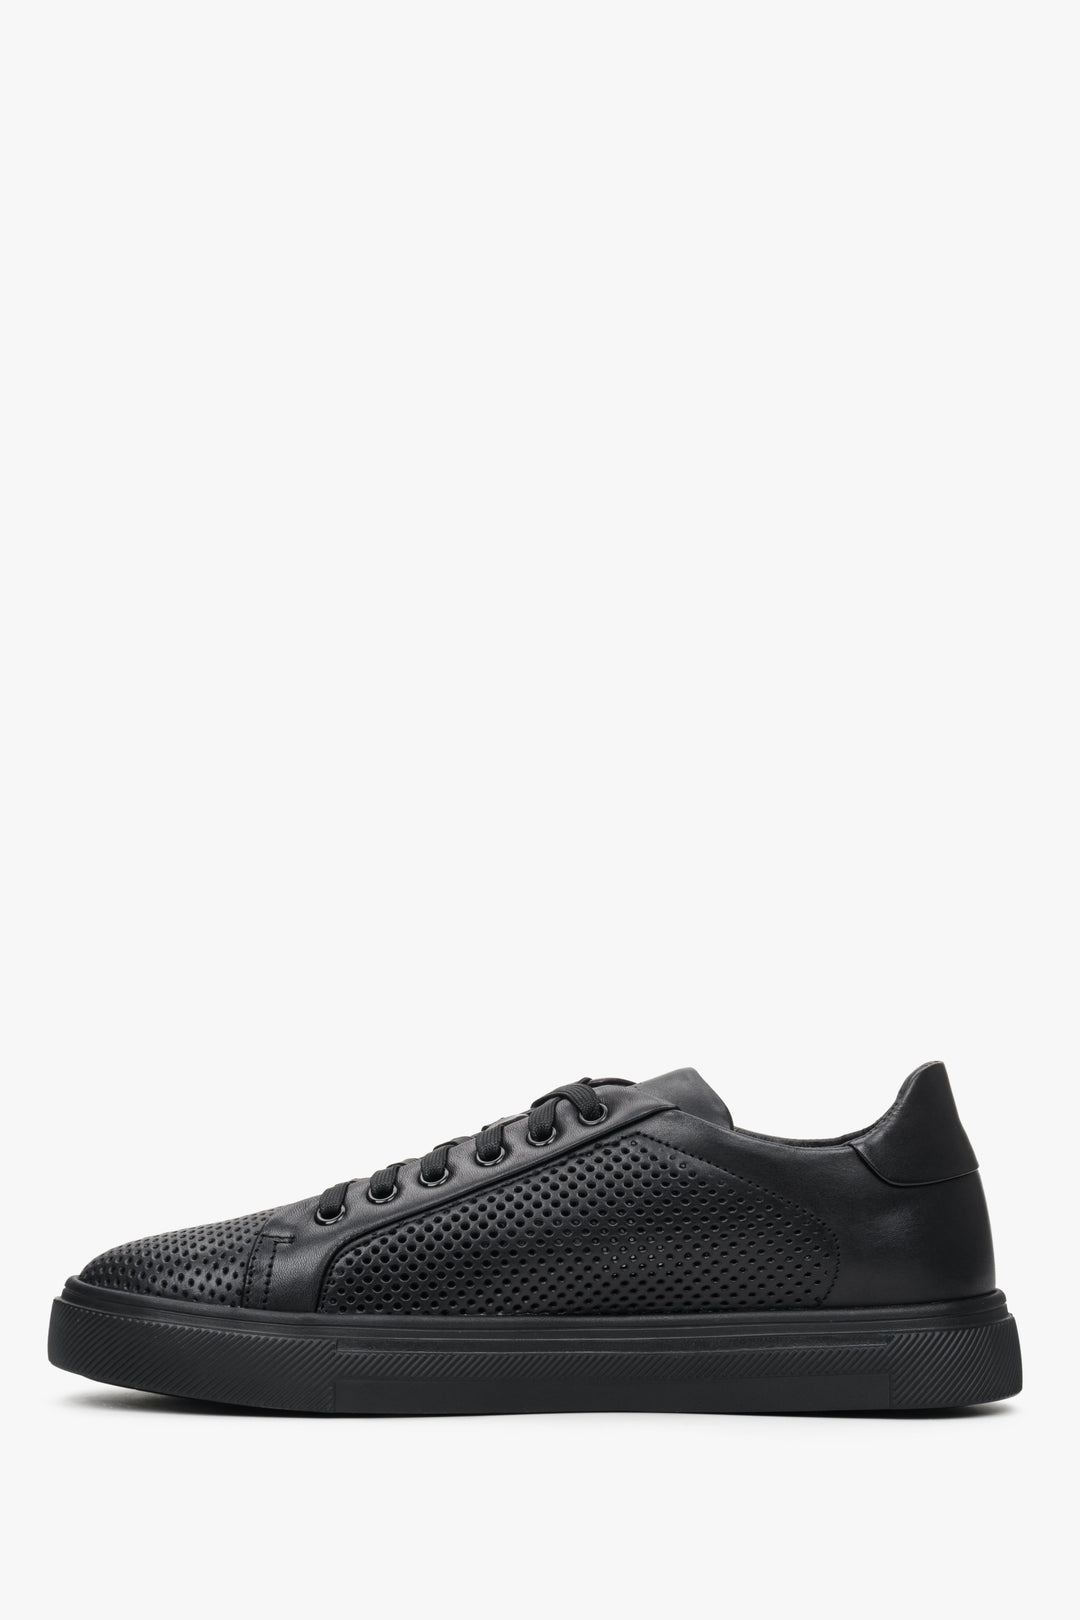 Men's black sneakers by Estro with perforations - shoe profile.